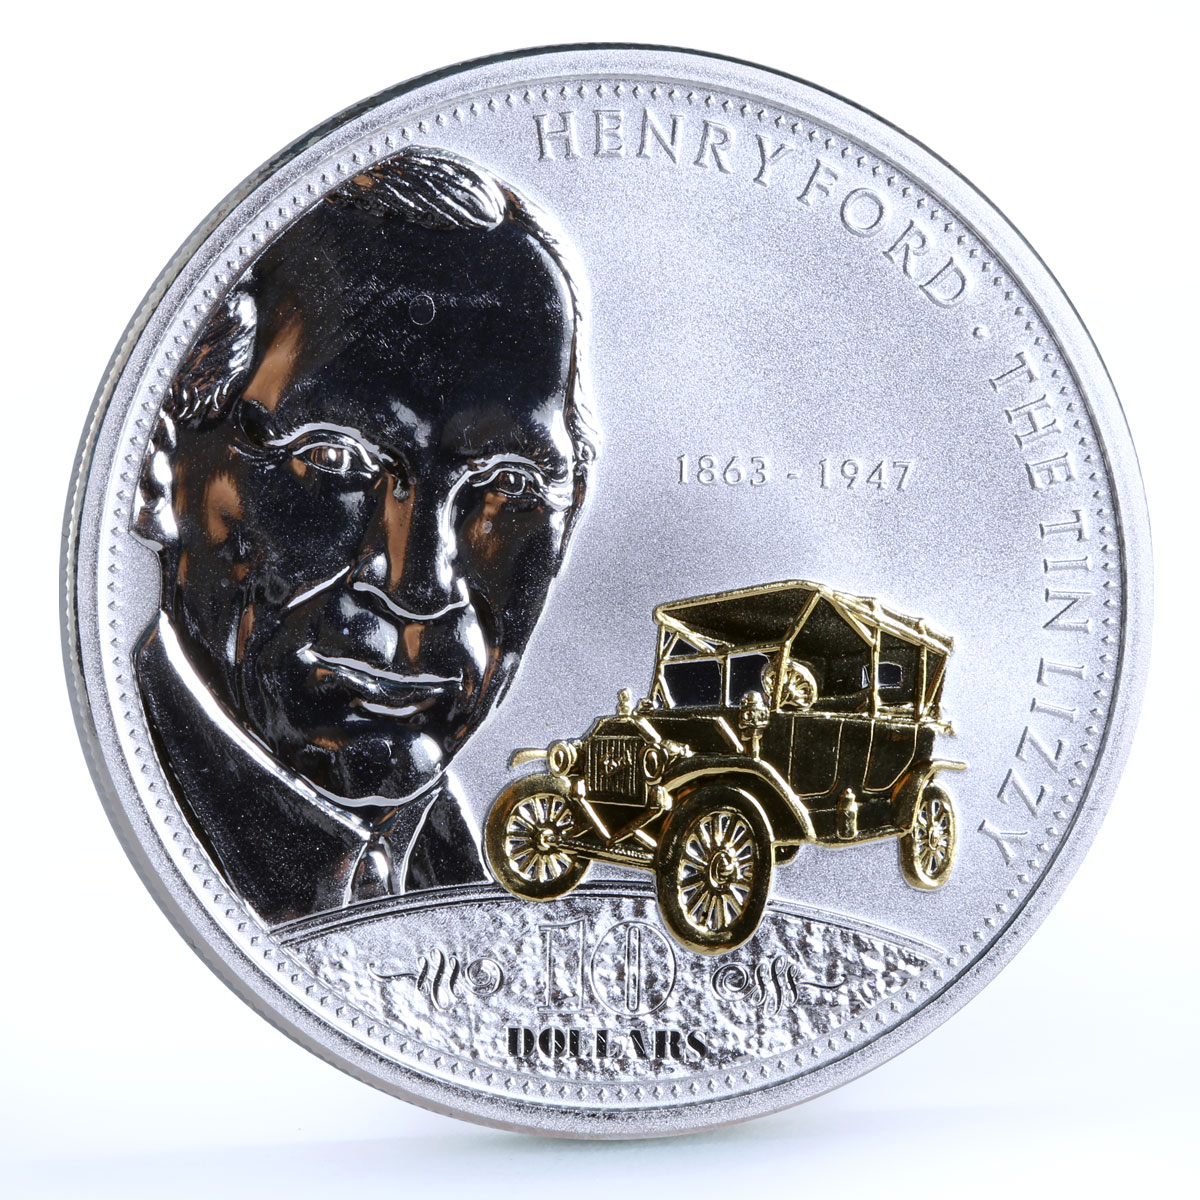 Cook Islands 10 dollars Henry Ford and The Tin Lizzy Car gilded silver coin 2008